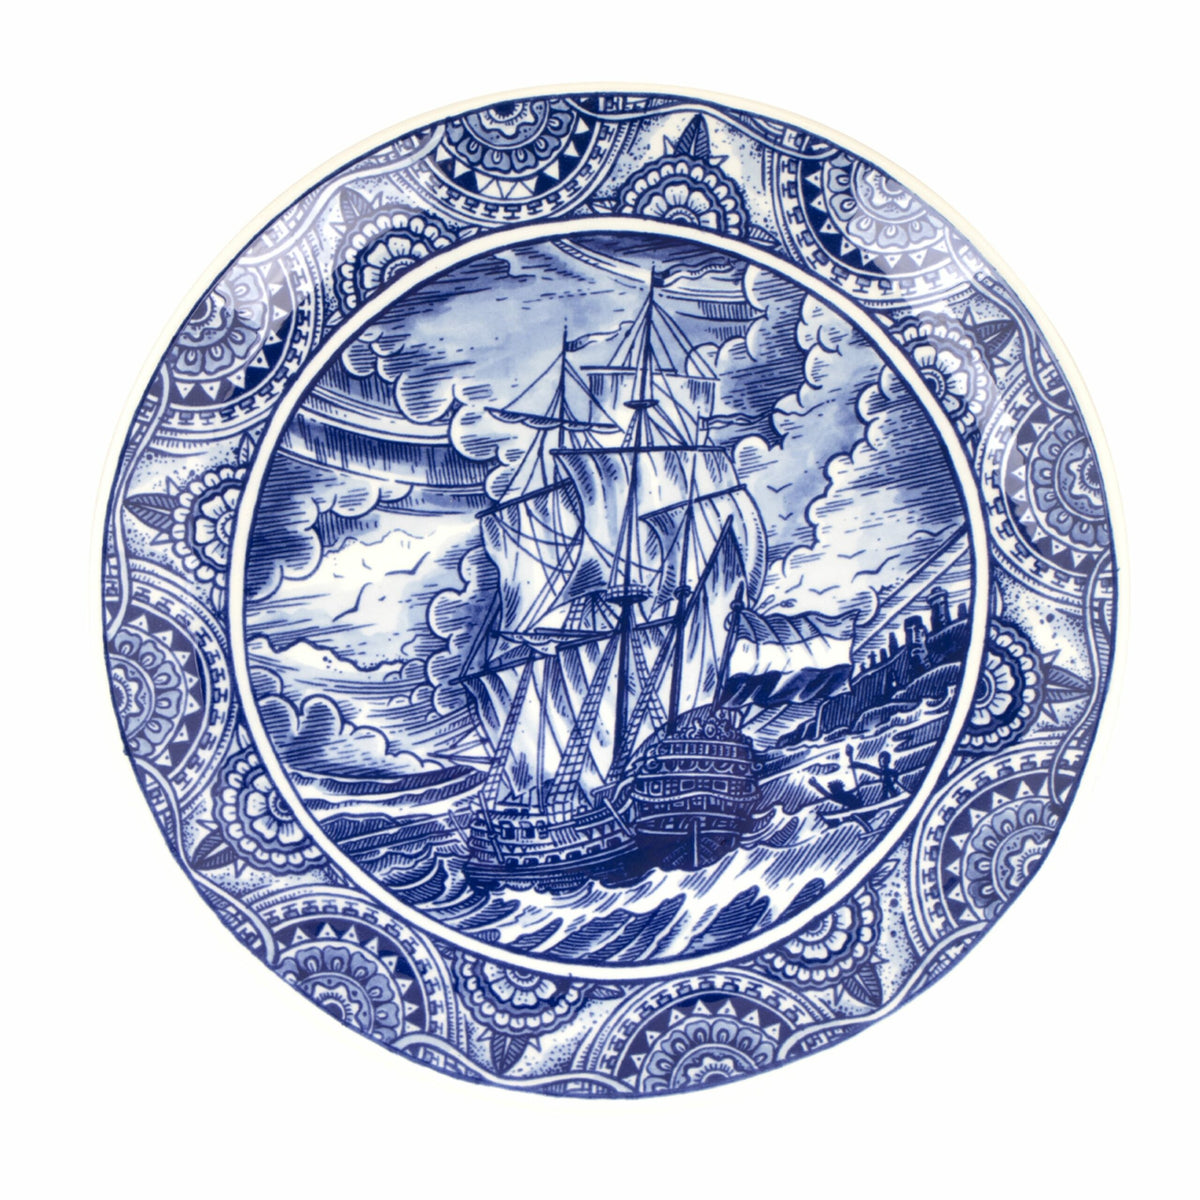 Easter Island Plate - Schiffmacher Royal Blue Tattoo by Royal Delft